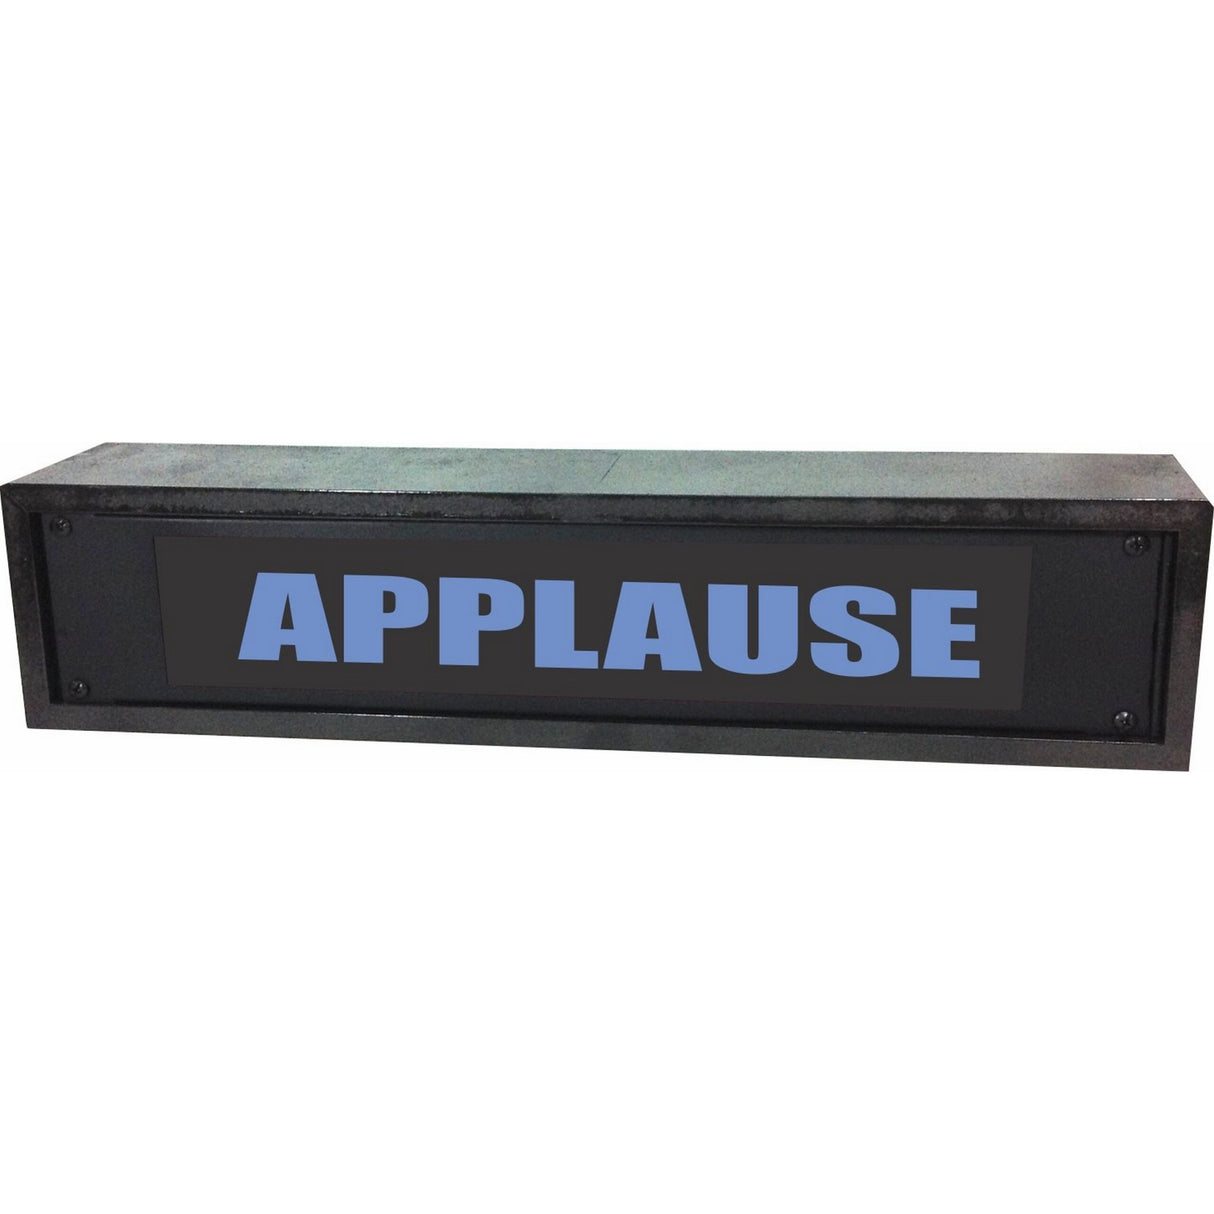 American Recorder OAS-4053BL "APPLAUSE" 2U Rackmount LED Lighted Sign with Enclosure, Blue